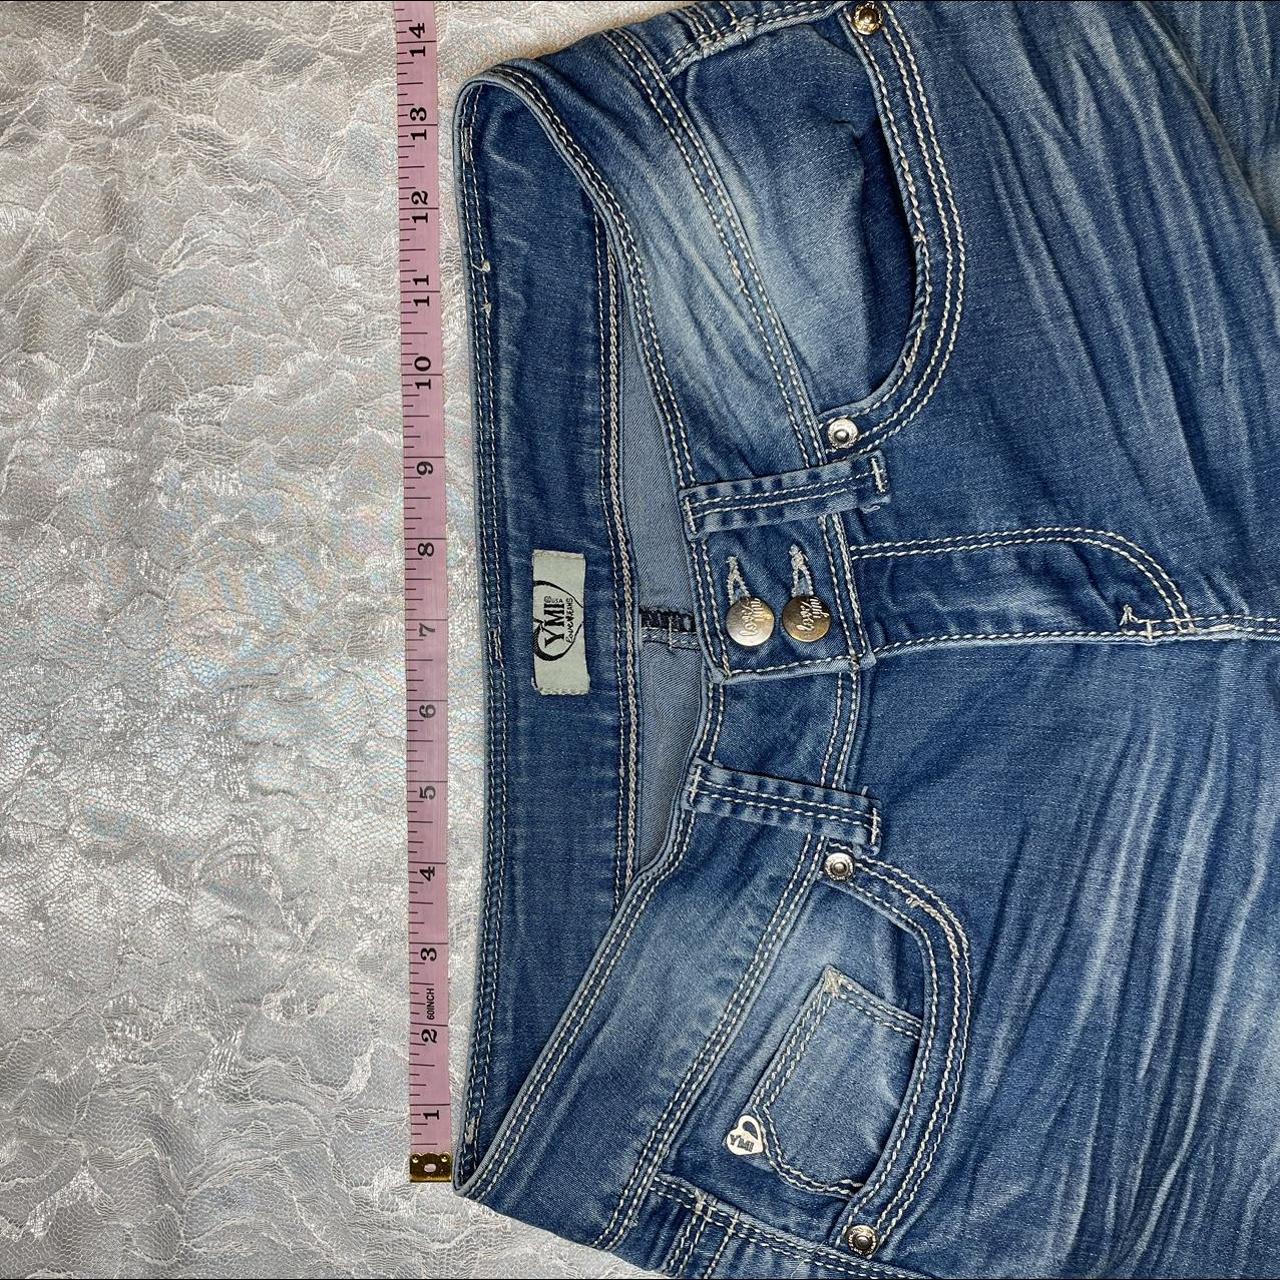 Y2K YMI Jeans Blue Denim Pants 🛸, ⭐️ FREE GIFT WITH